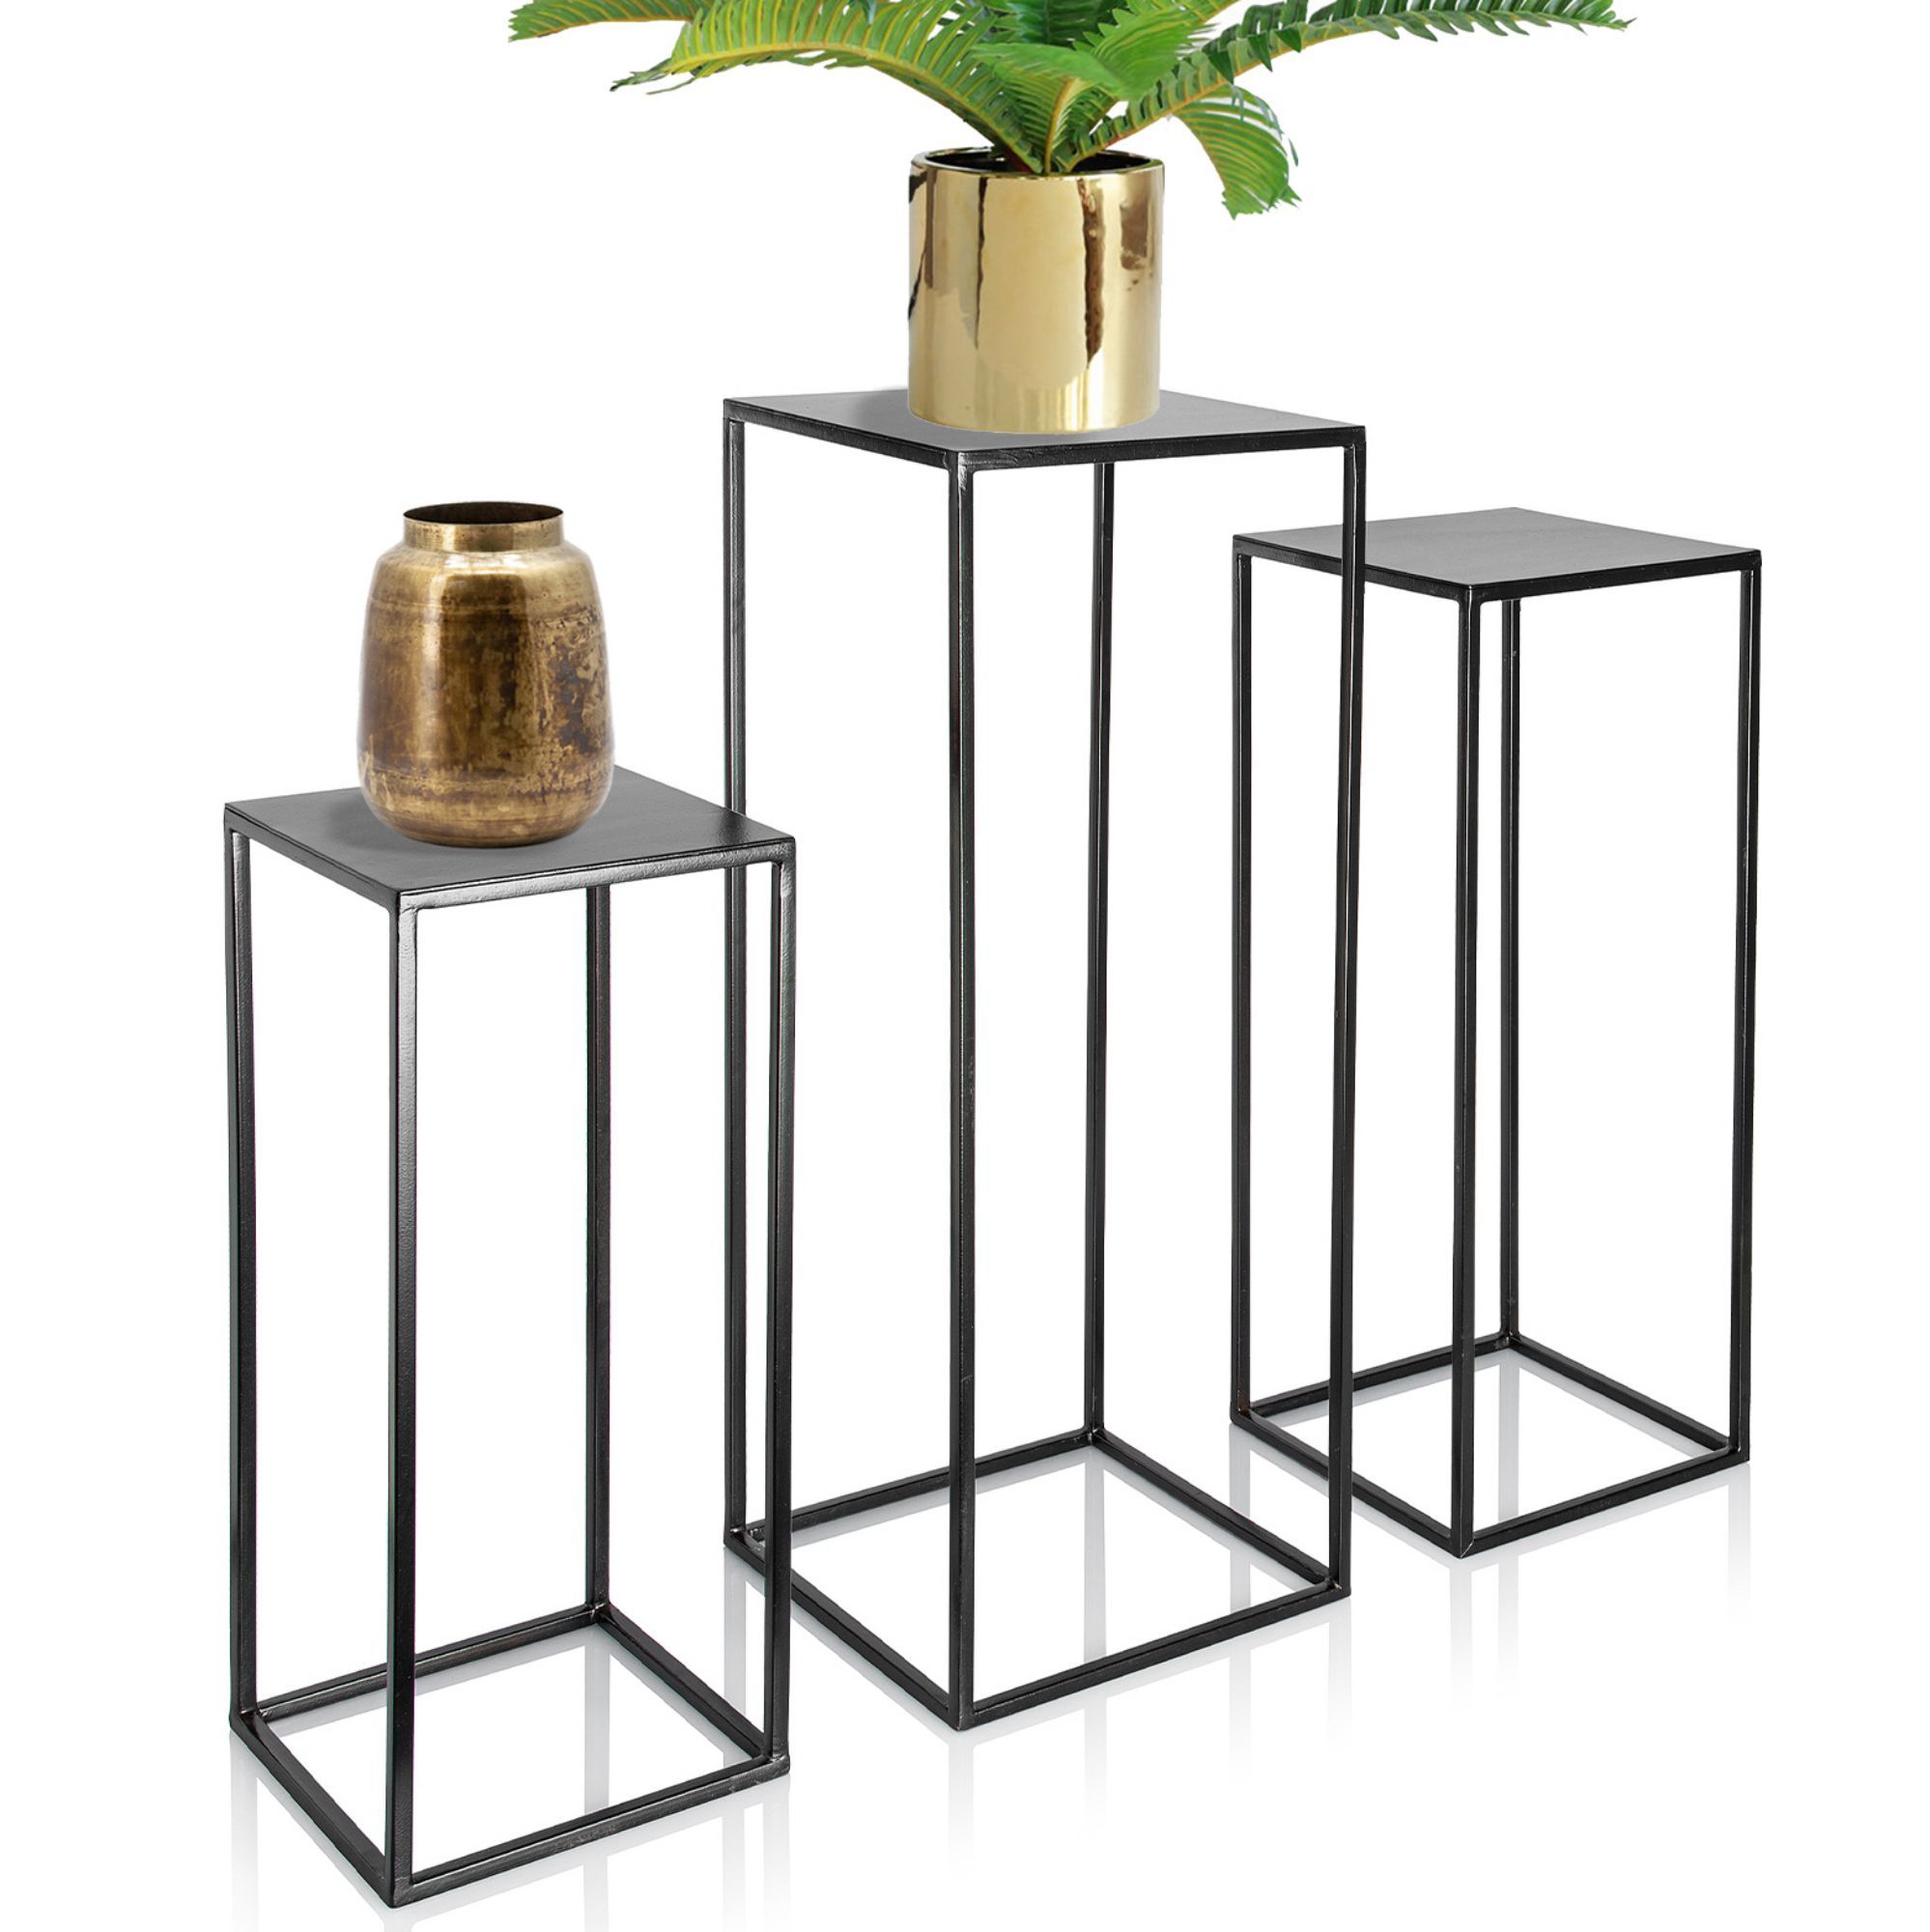 Trio Metal Plant Stand With High Square Rack Flower Holder | Kimisty Intended For Square Plant Stands (View 2 of 15)